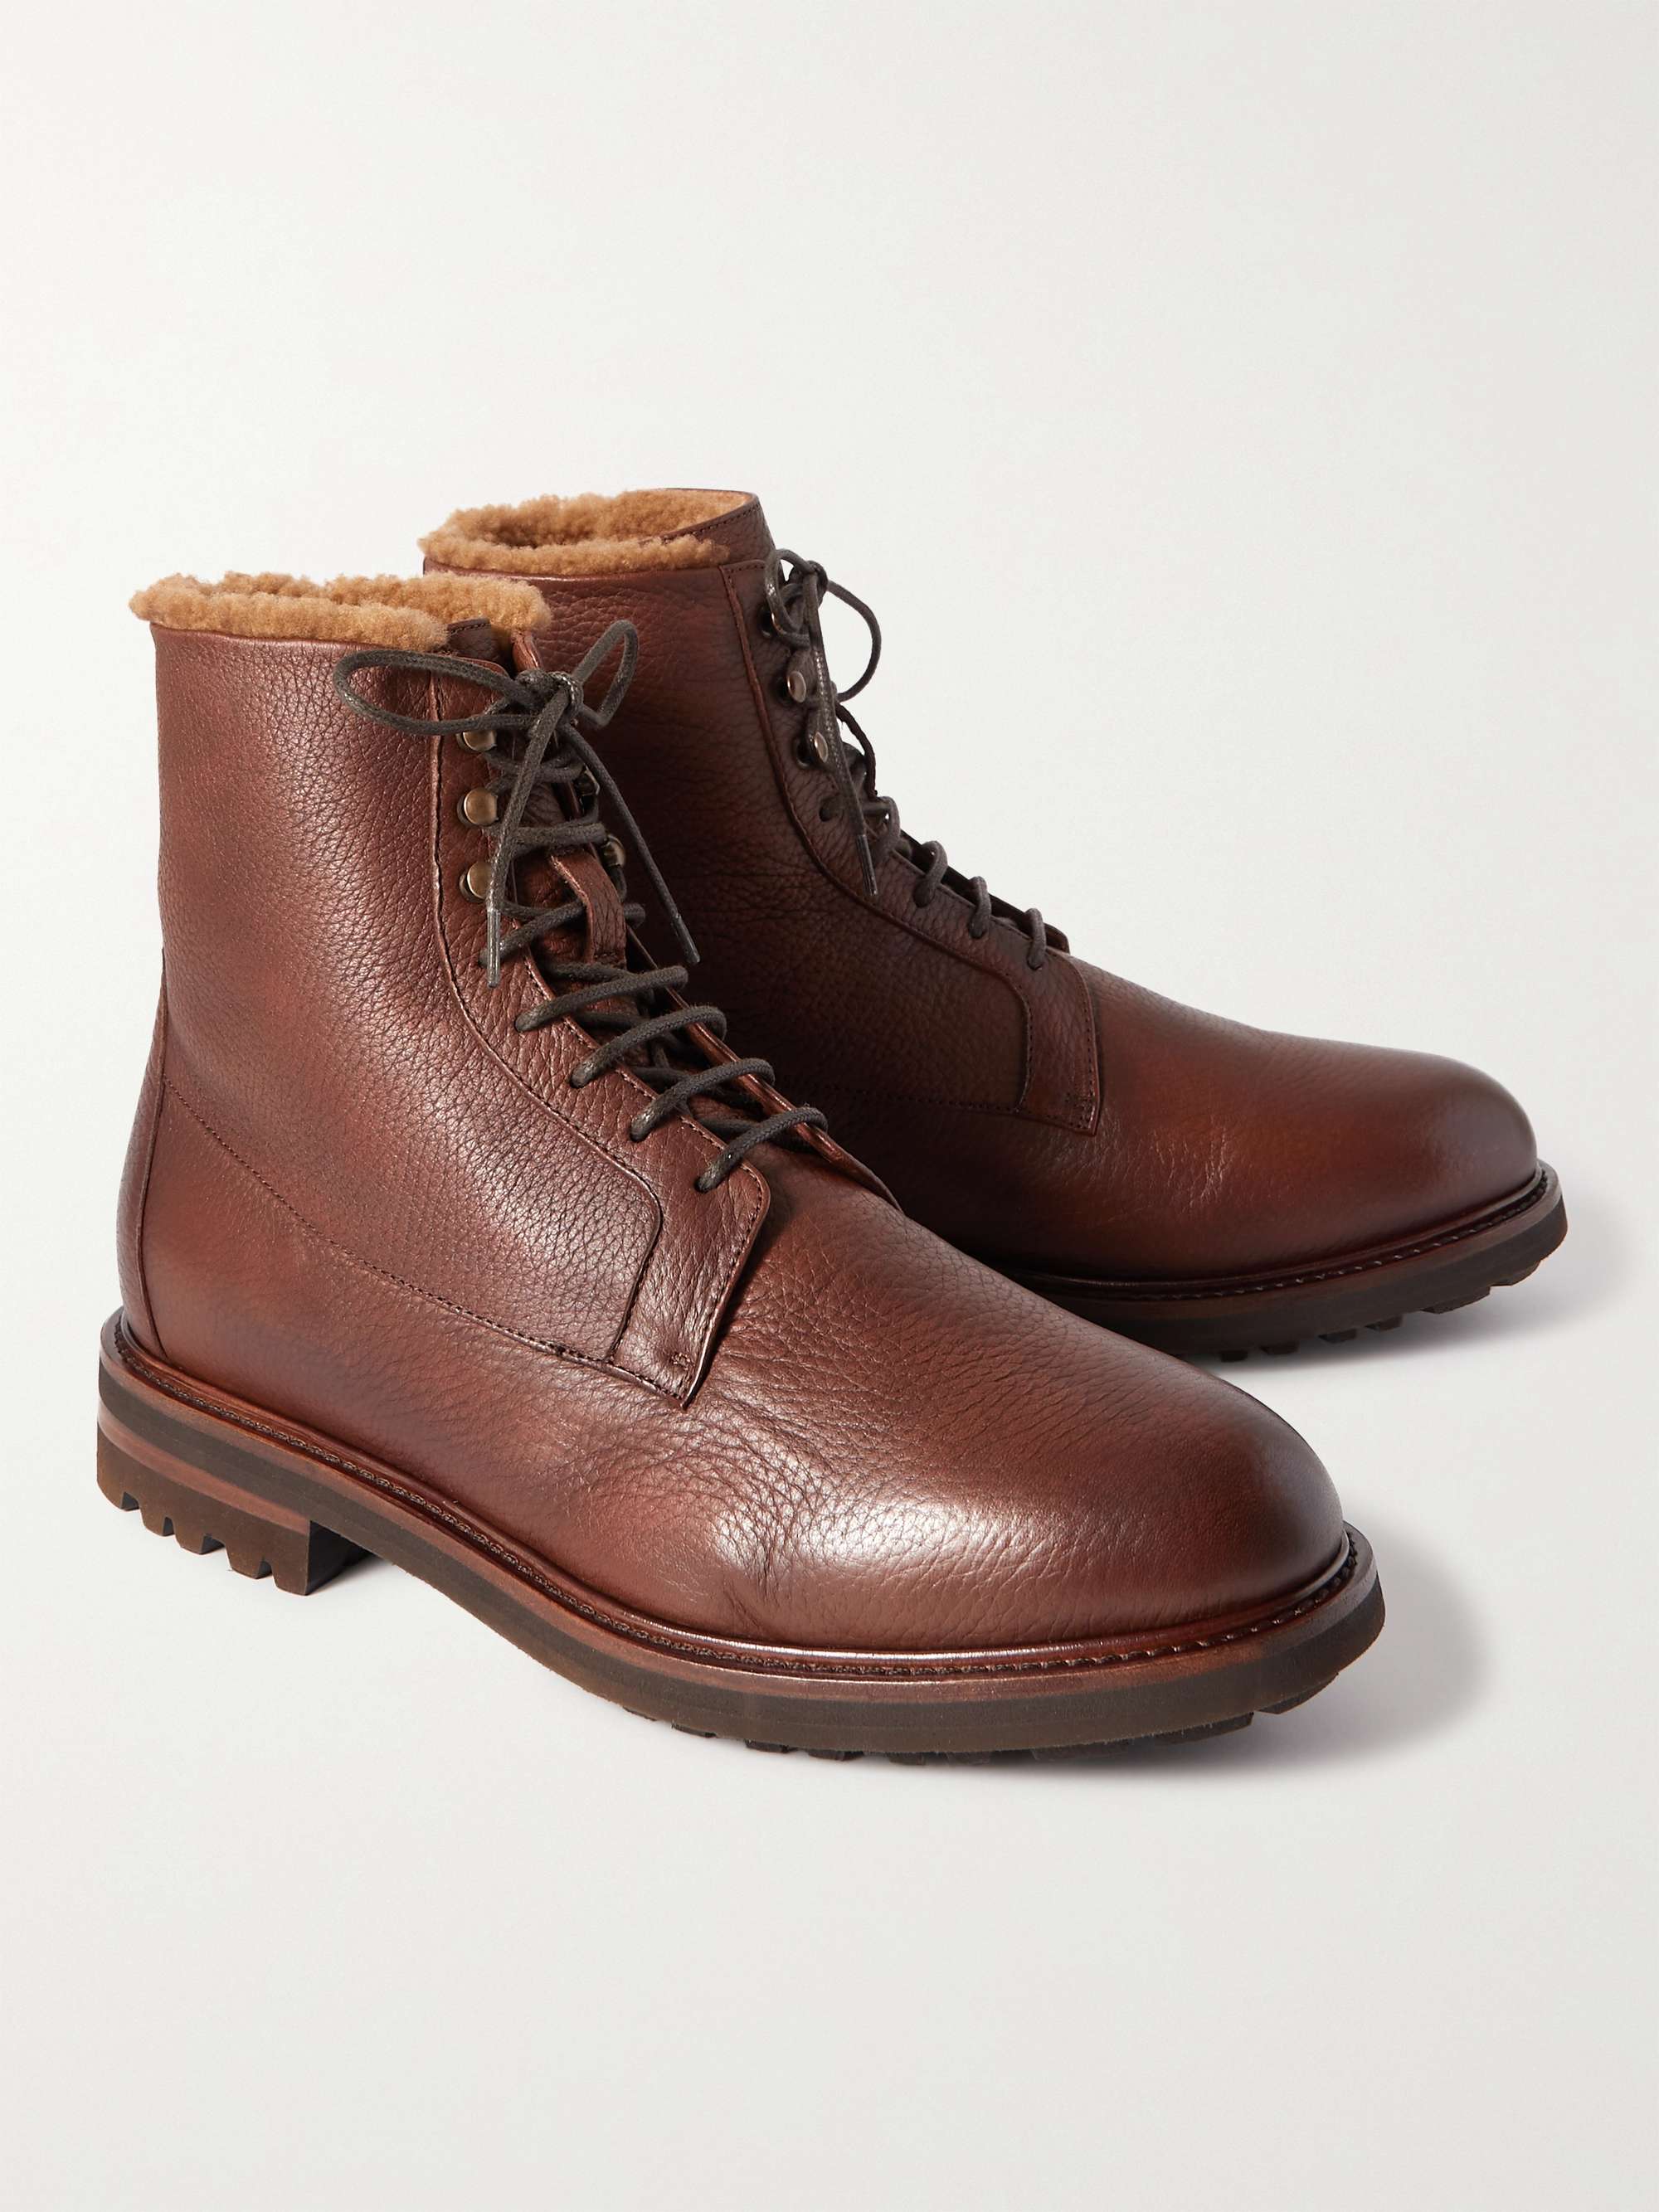 BRUNELLO CUCINELLI Shearling-Lined Full-Grain Leather Boots